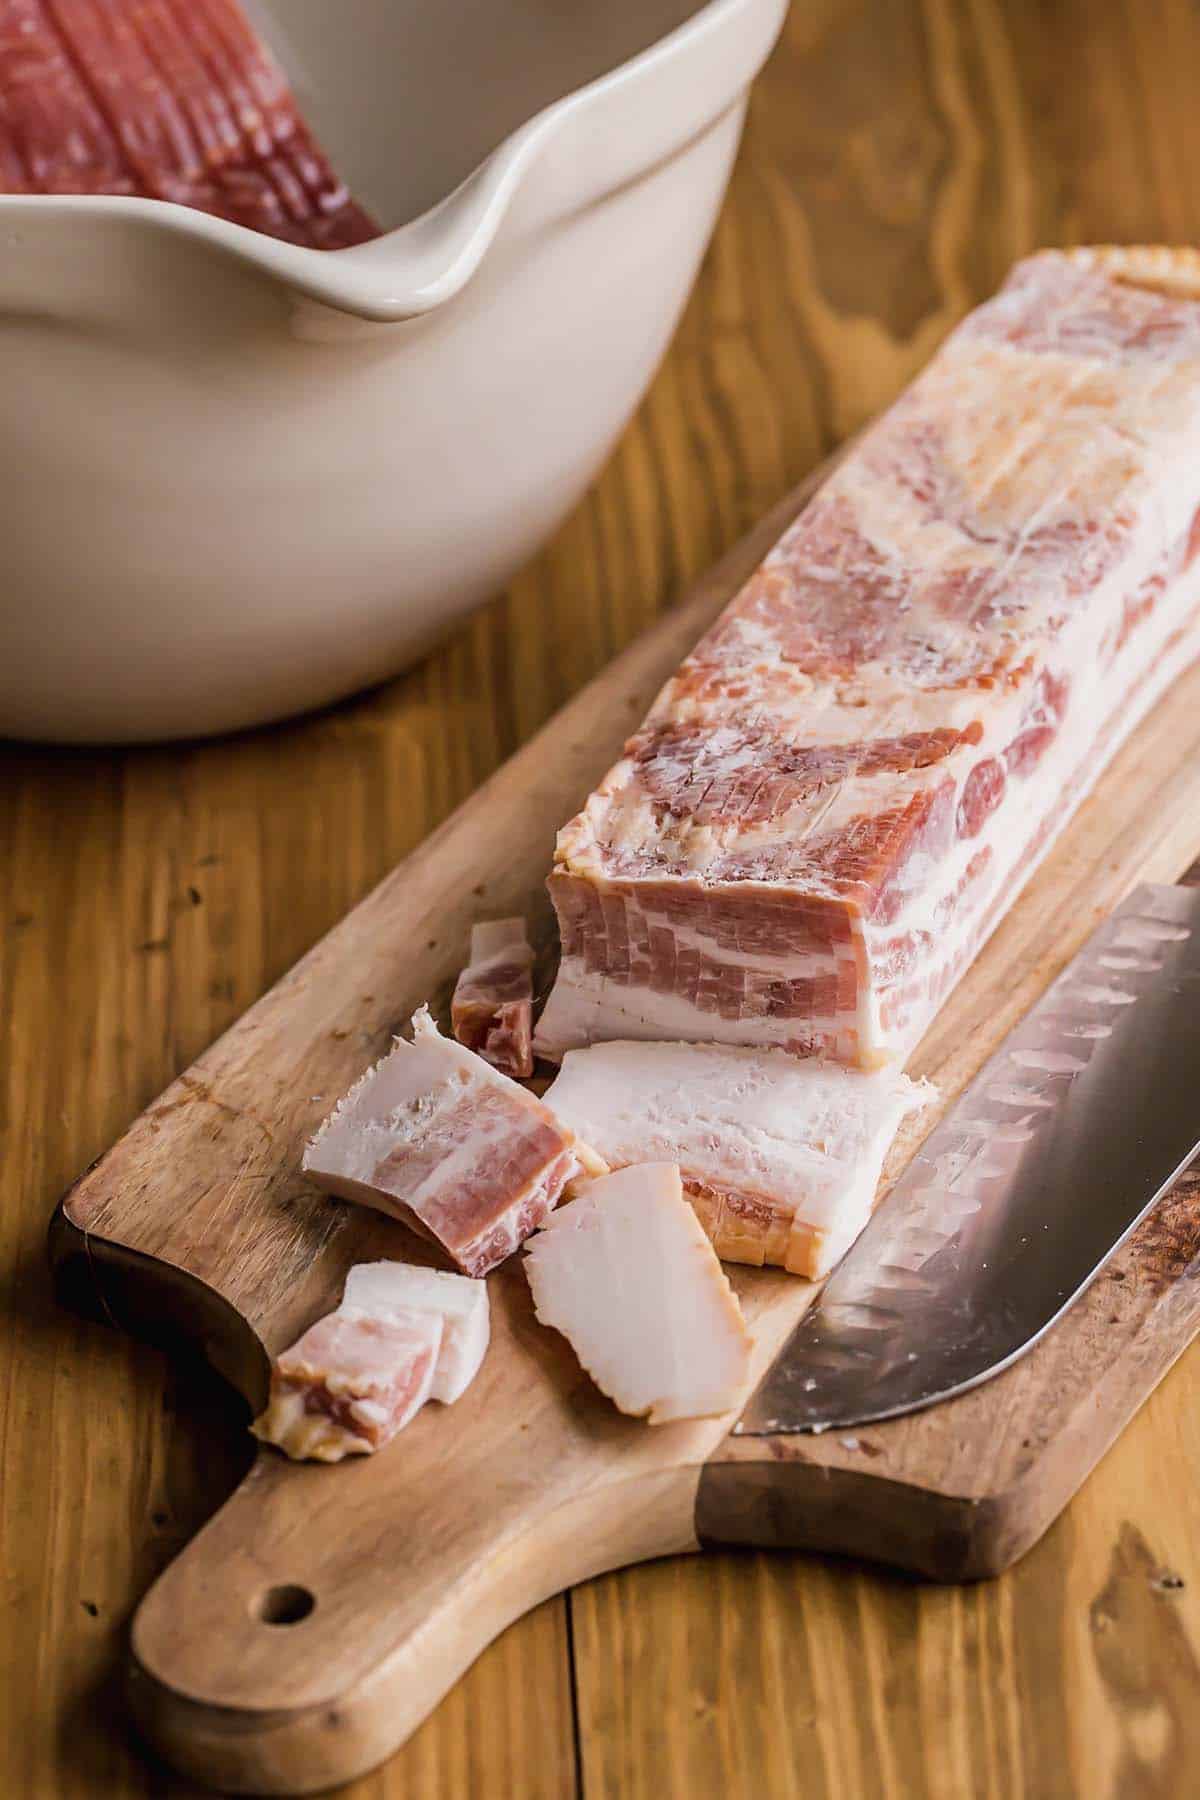 How To Cook Bacon From Frozen